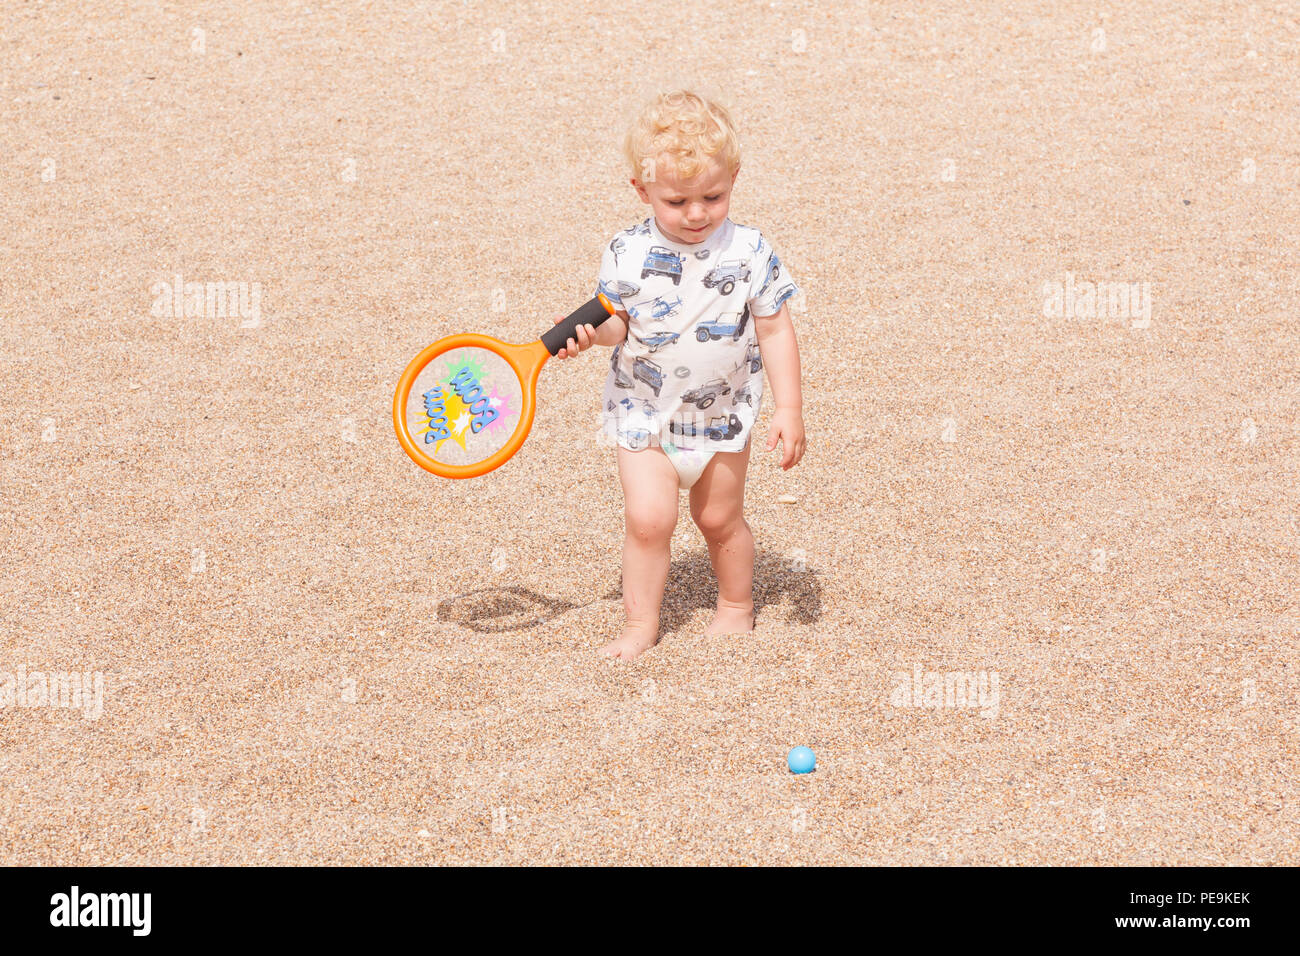 Two year old bow playing with a bat and ball, Devon, England, United Kingdom. Stock Photo